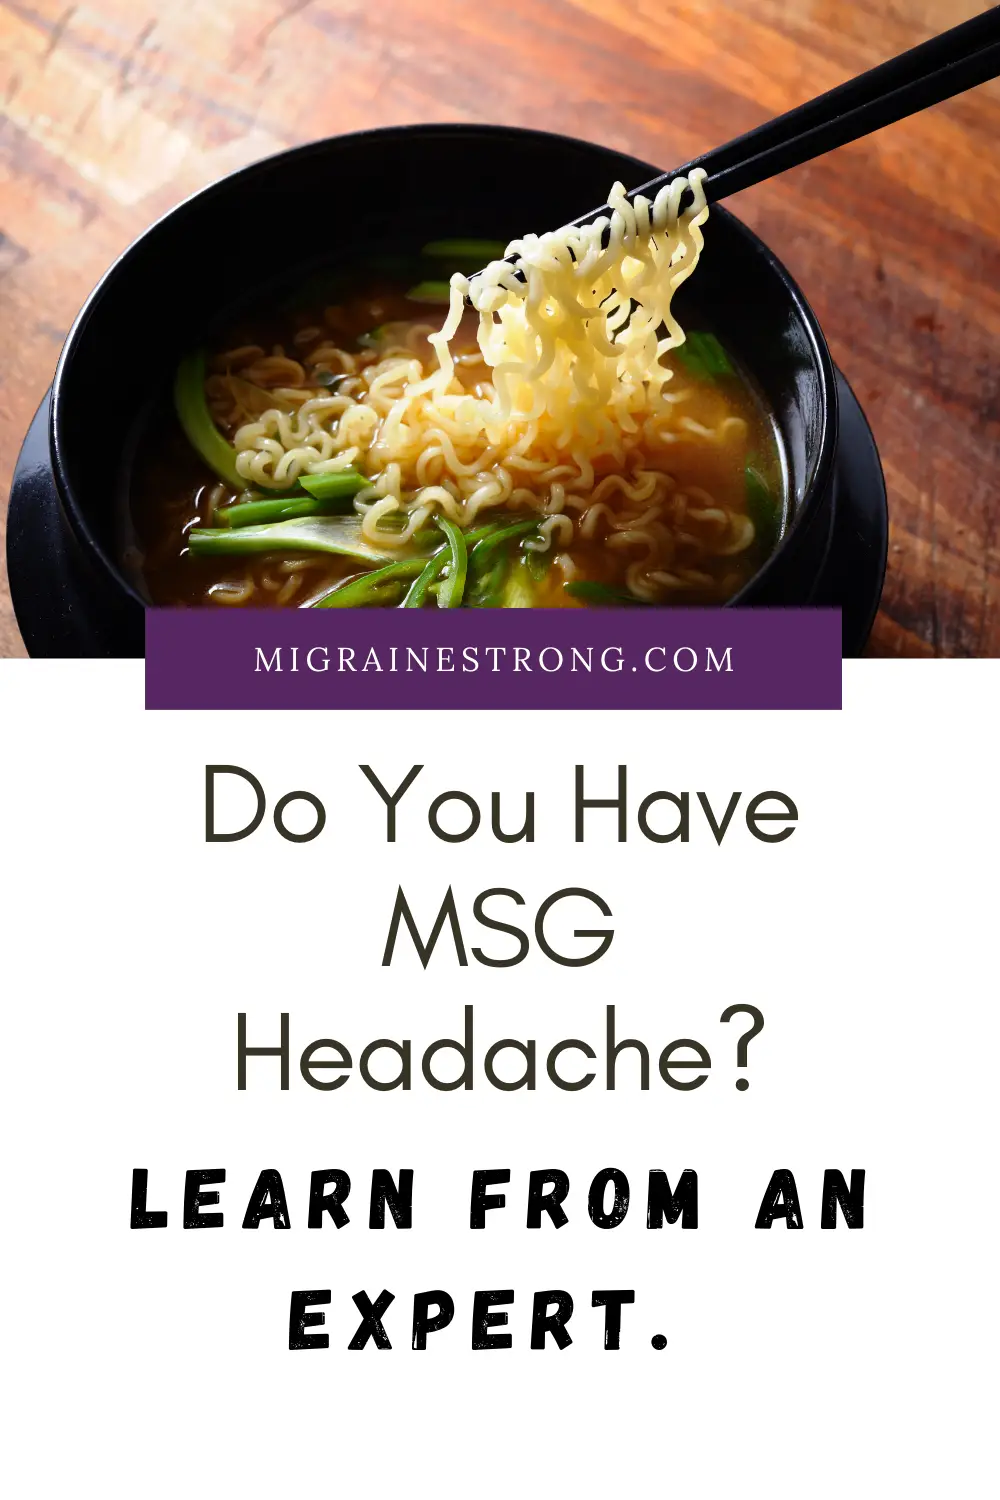 MSG Headache- The Controversy, the Facts and the Real Story